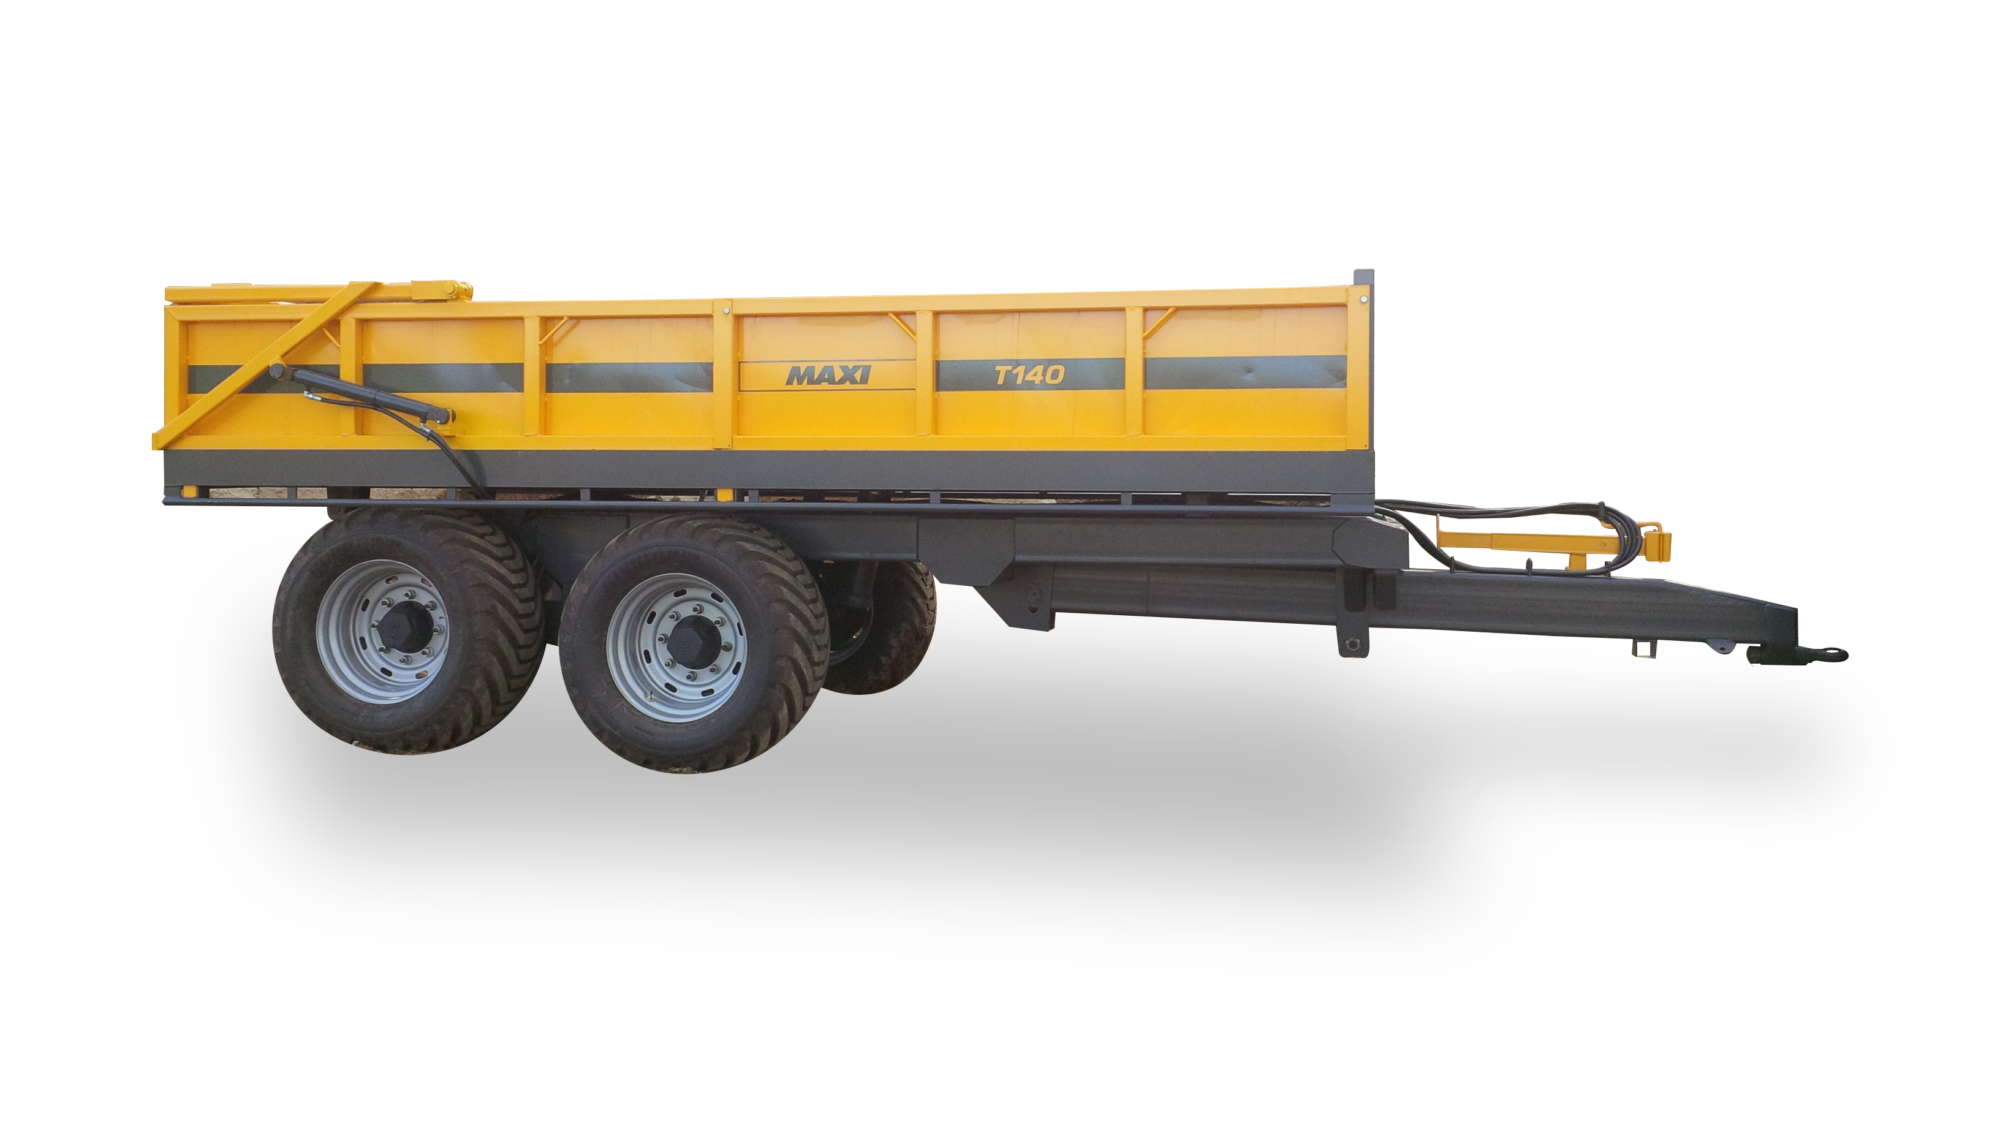 T140: Designed for heavy-duty tasks in New Zealand's environment